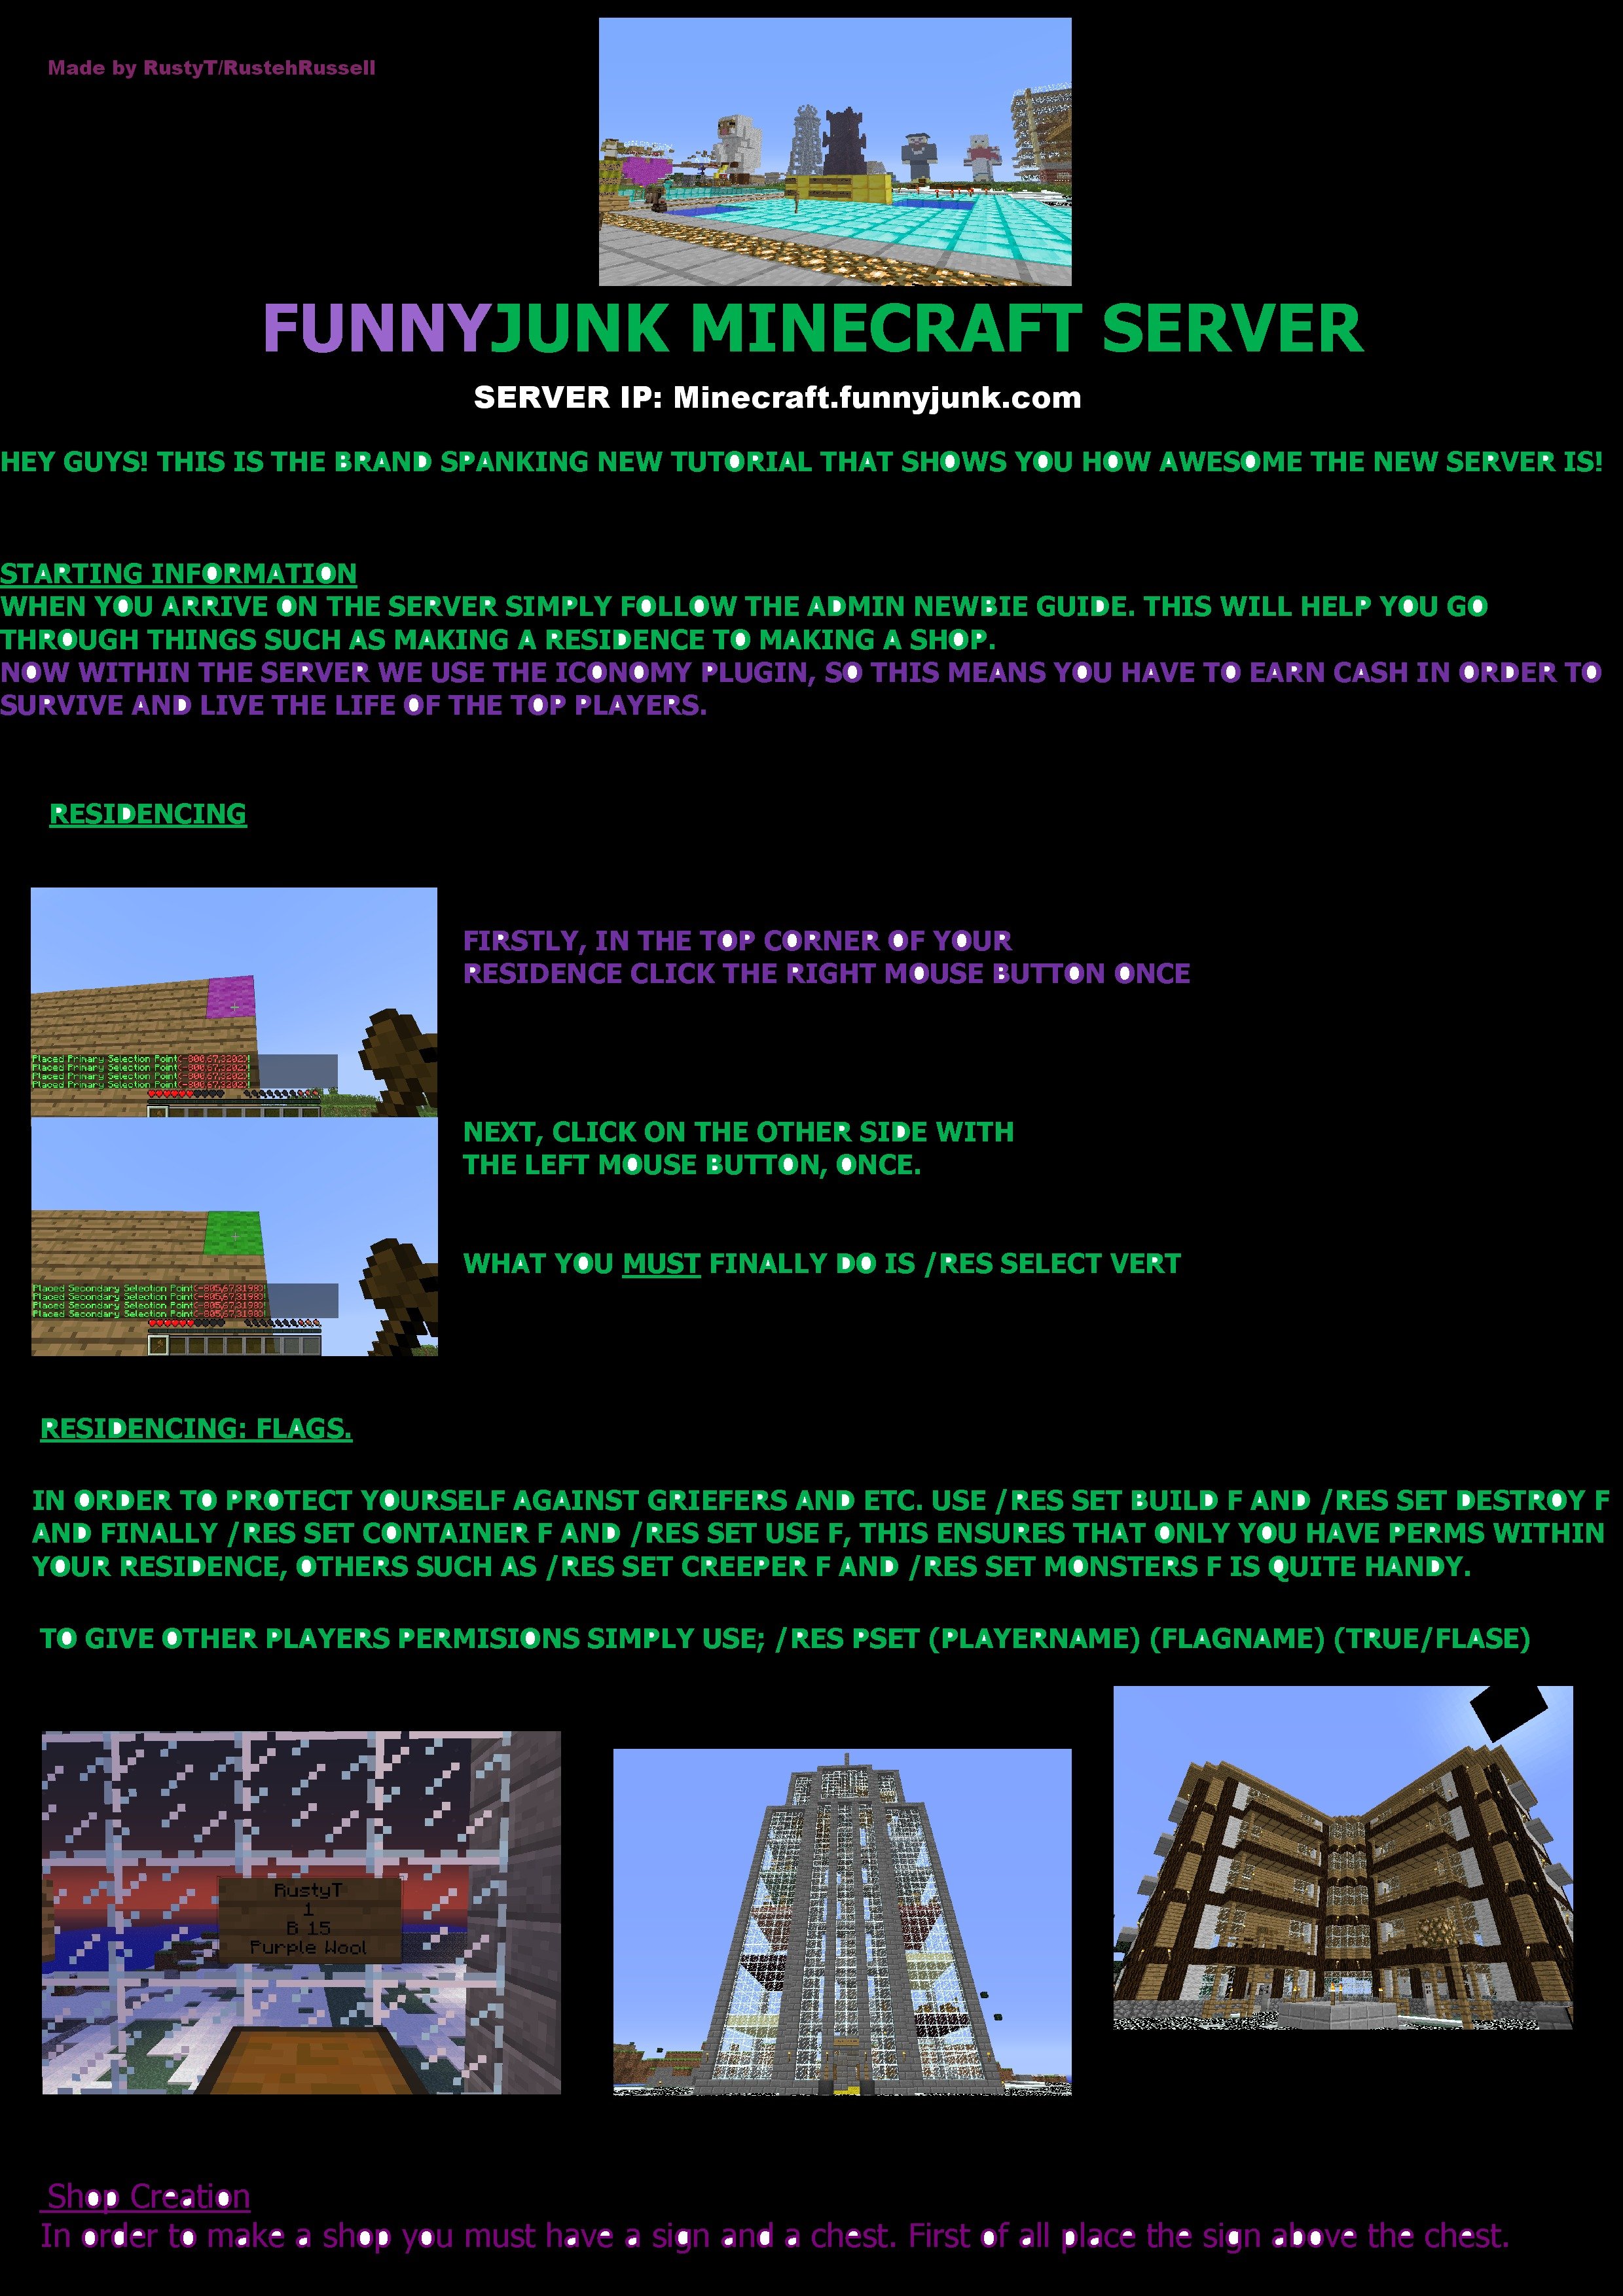 The Funnyjunk Minecraft Server. The official new server of Funnyjunk,